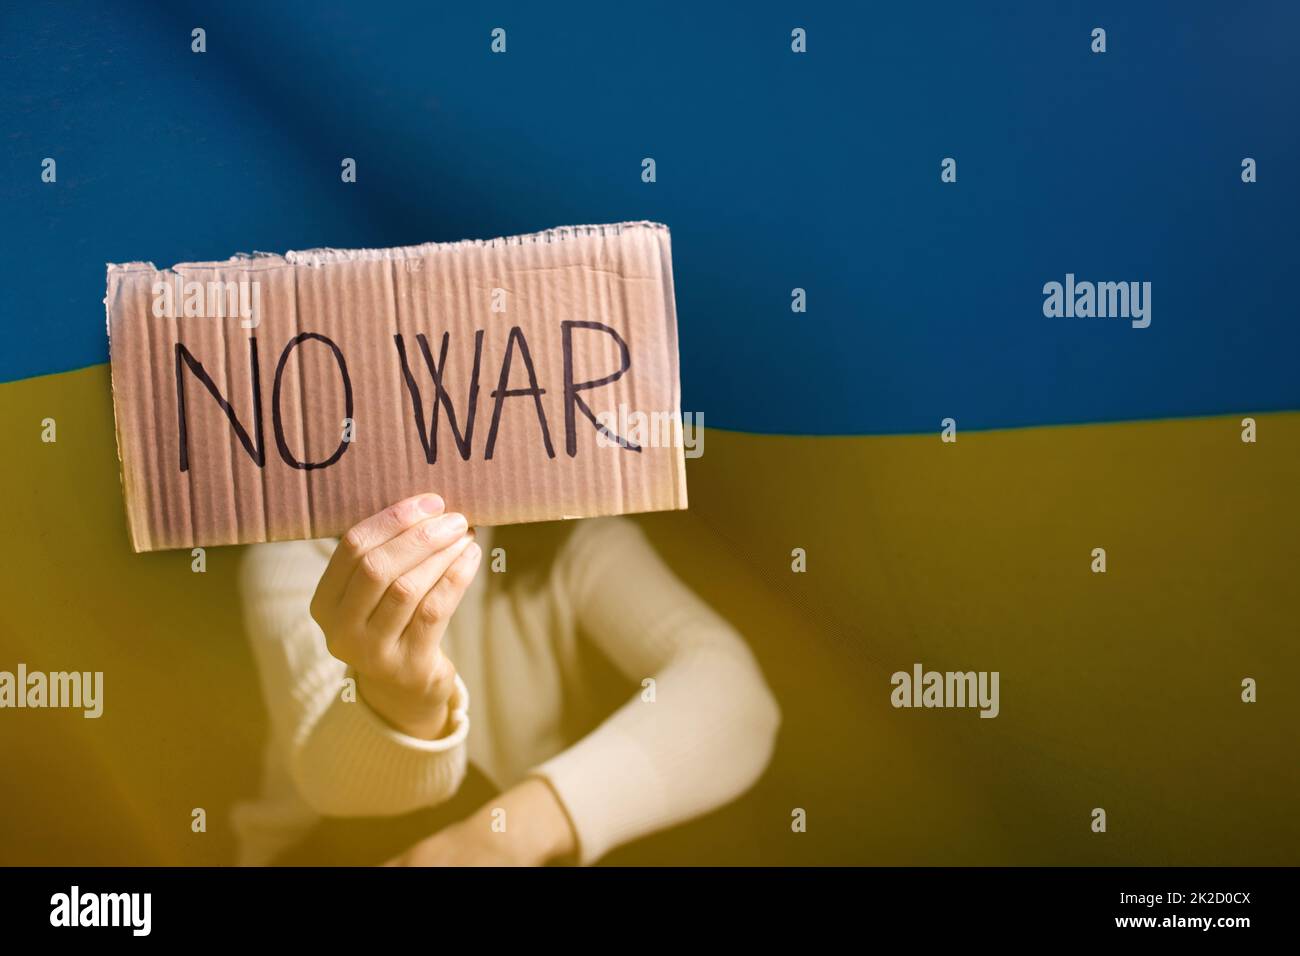 Concept of no war, stop war, stop russian aggression in Ukraine. Stock Photo